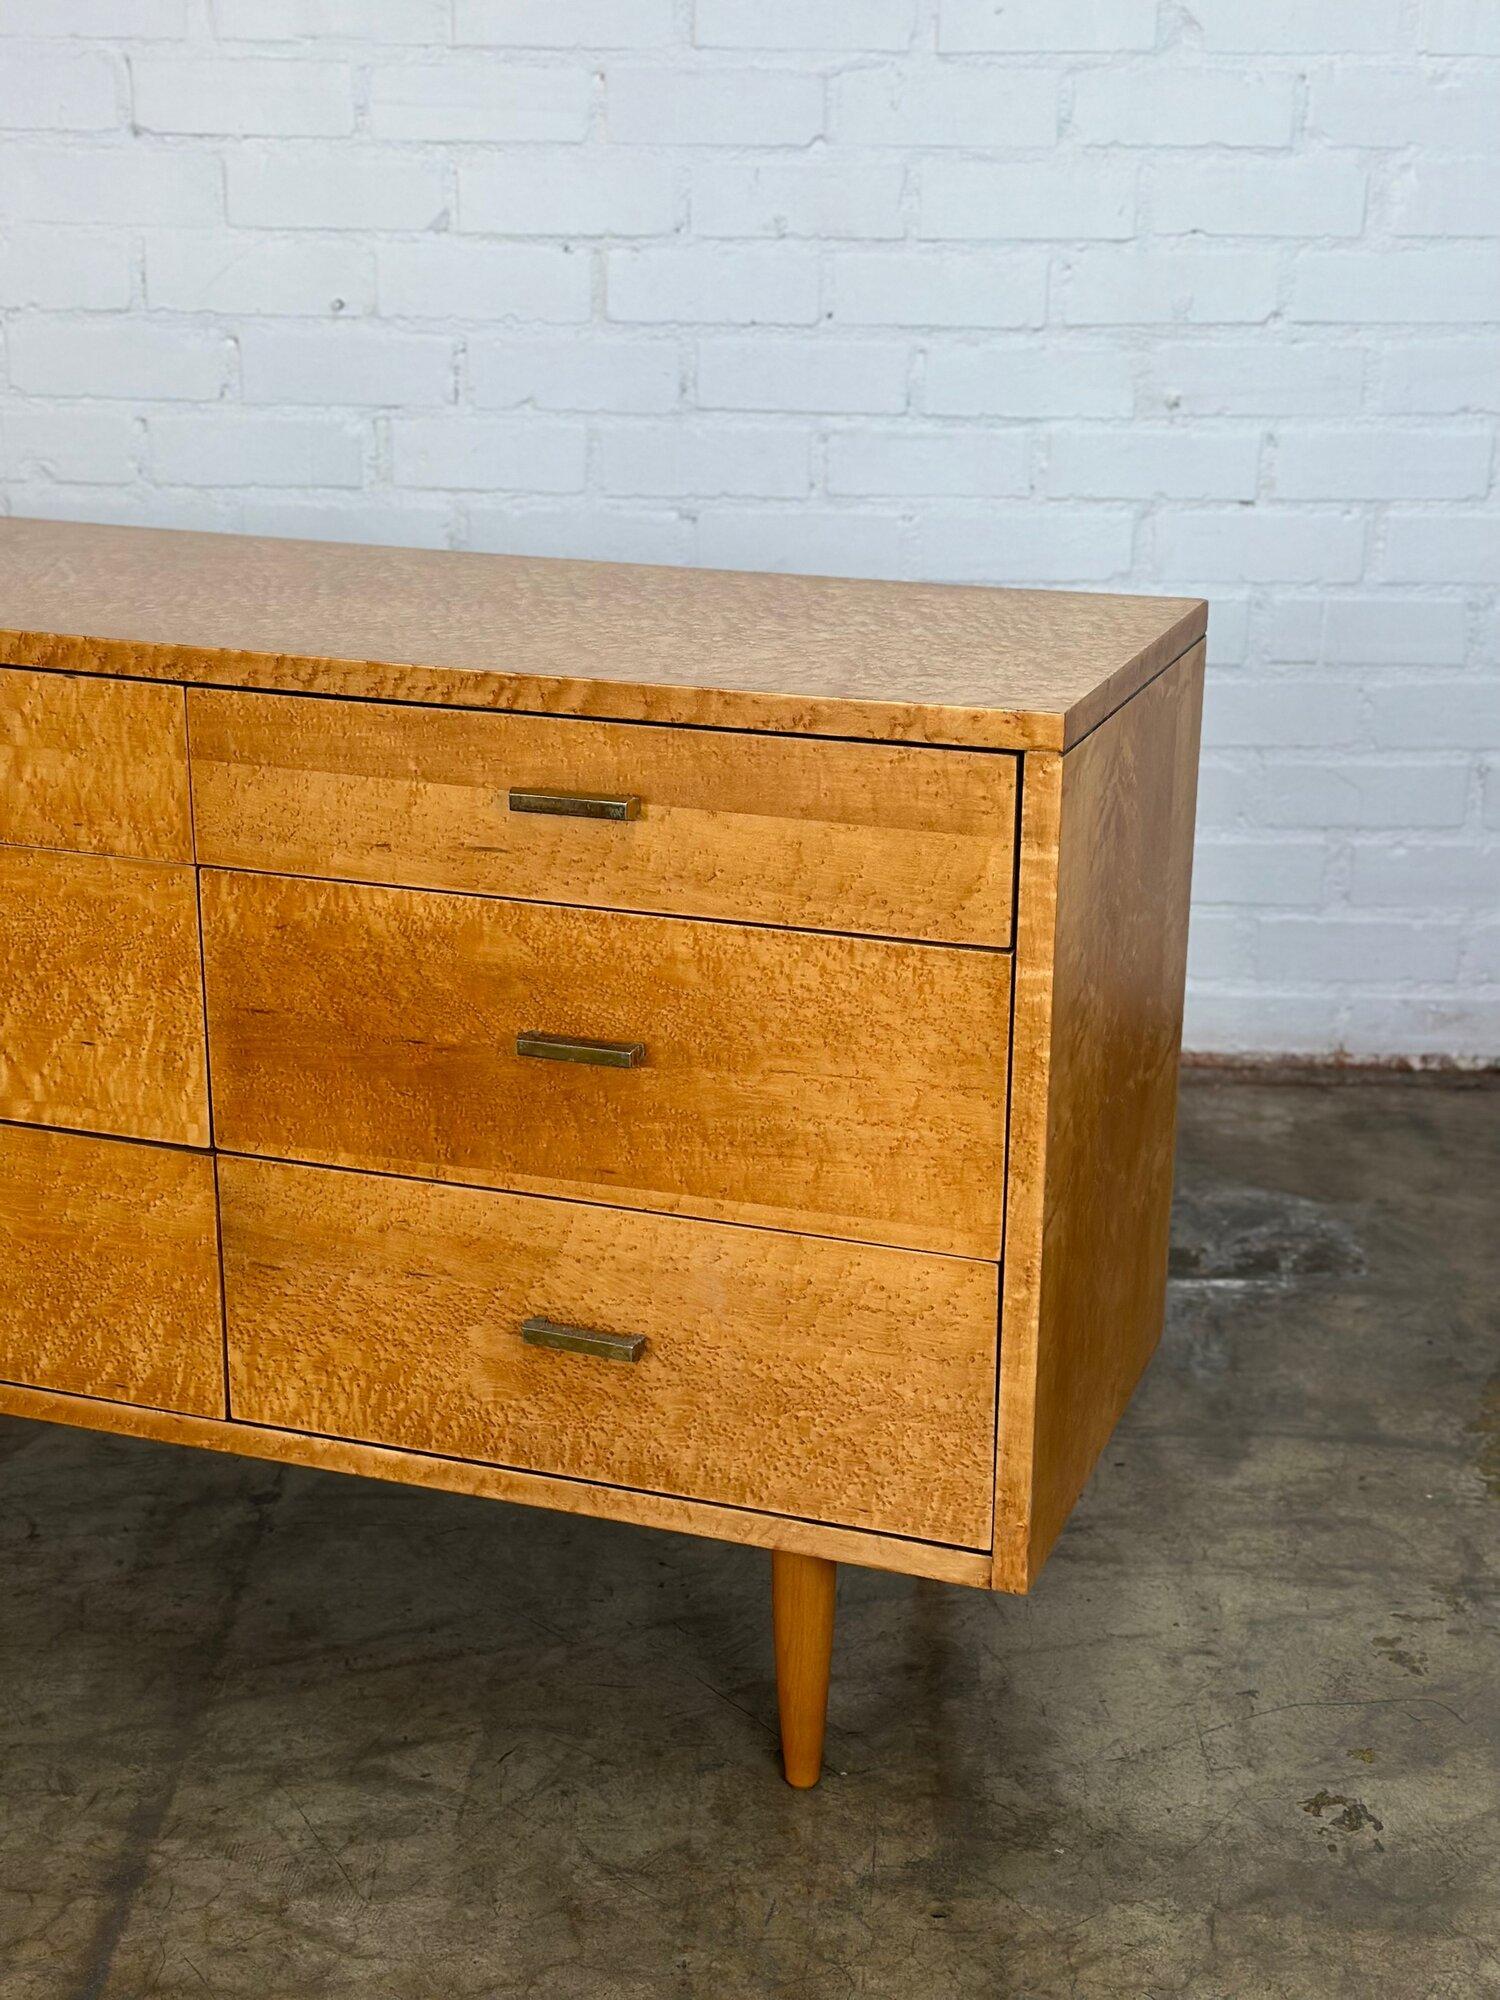 W72 D18 H33.5

Fully restored triple dresser on solid tapered legs. Item featured original hardware and has original manufacture stamp in tact. Dresser is fully functional and structurally sound. 

